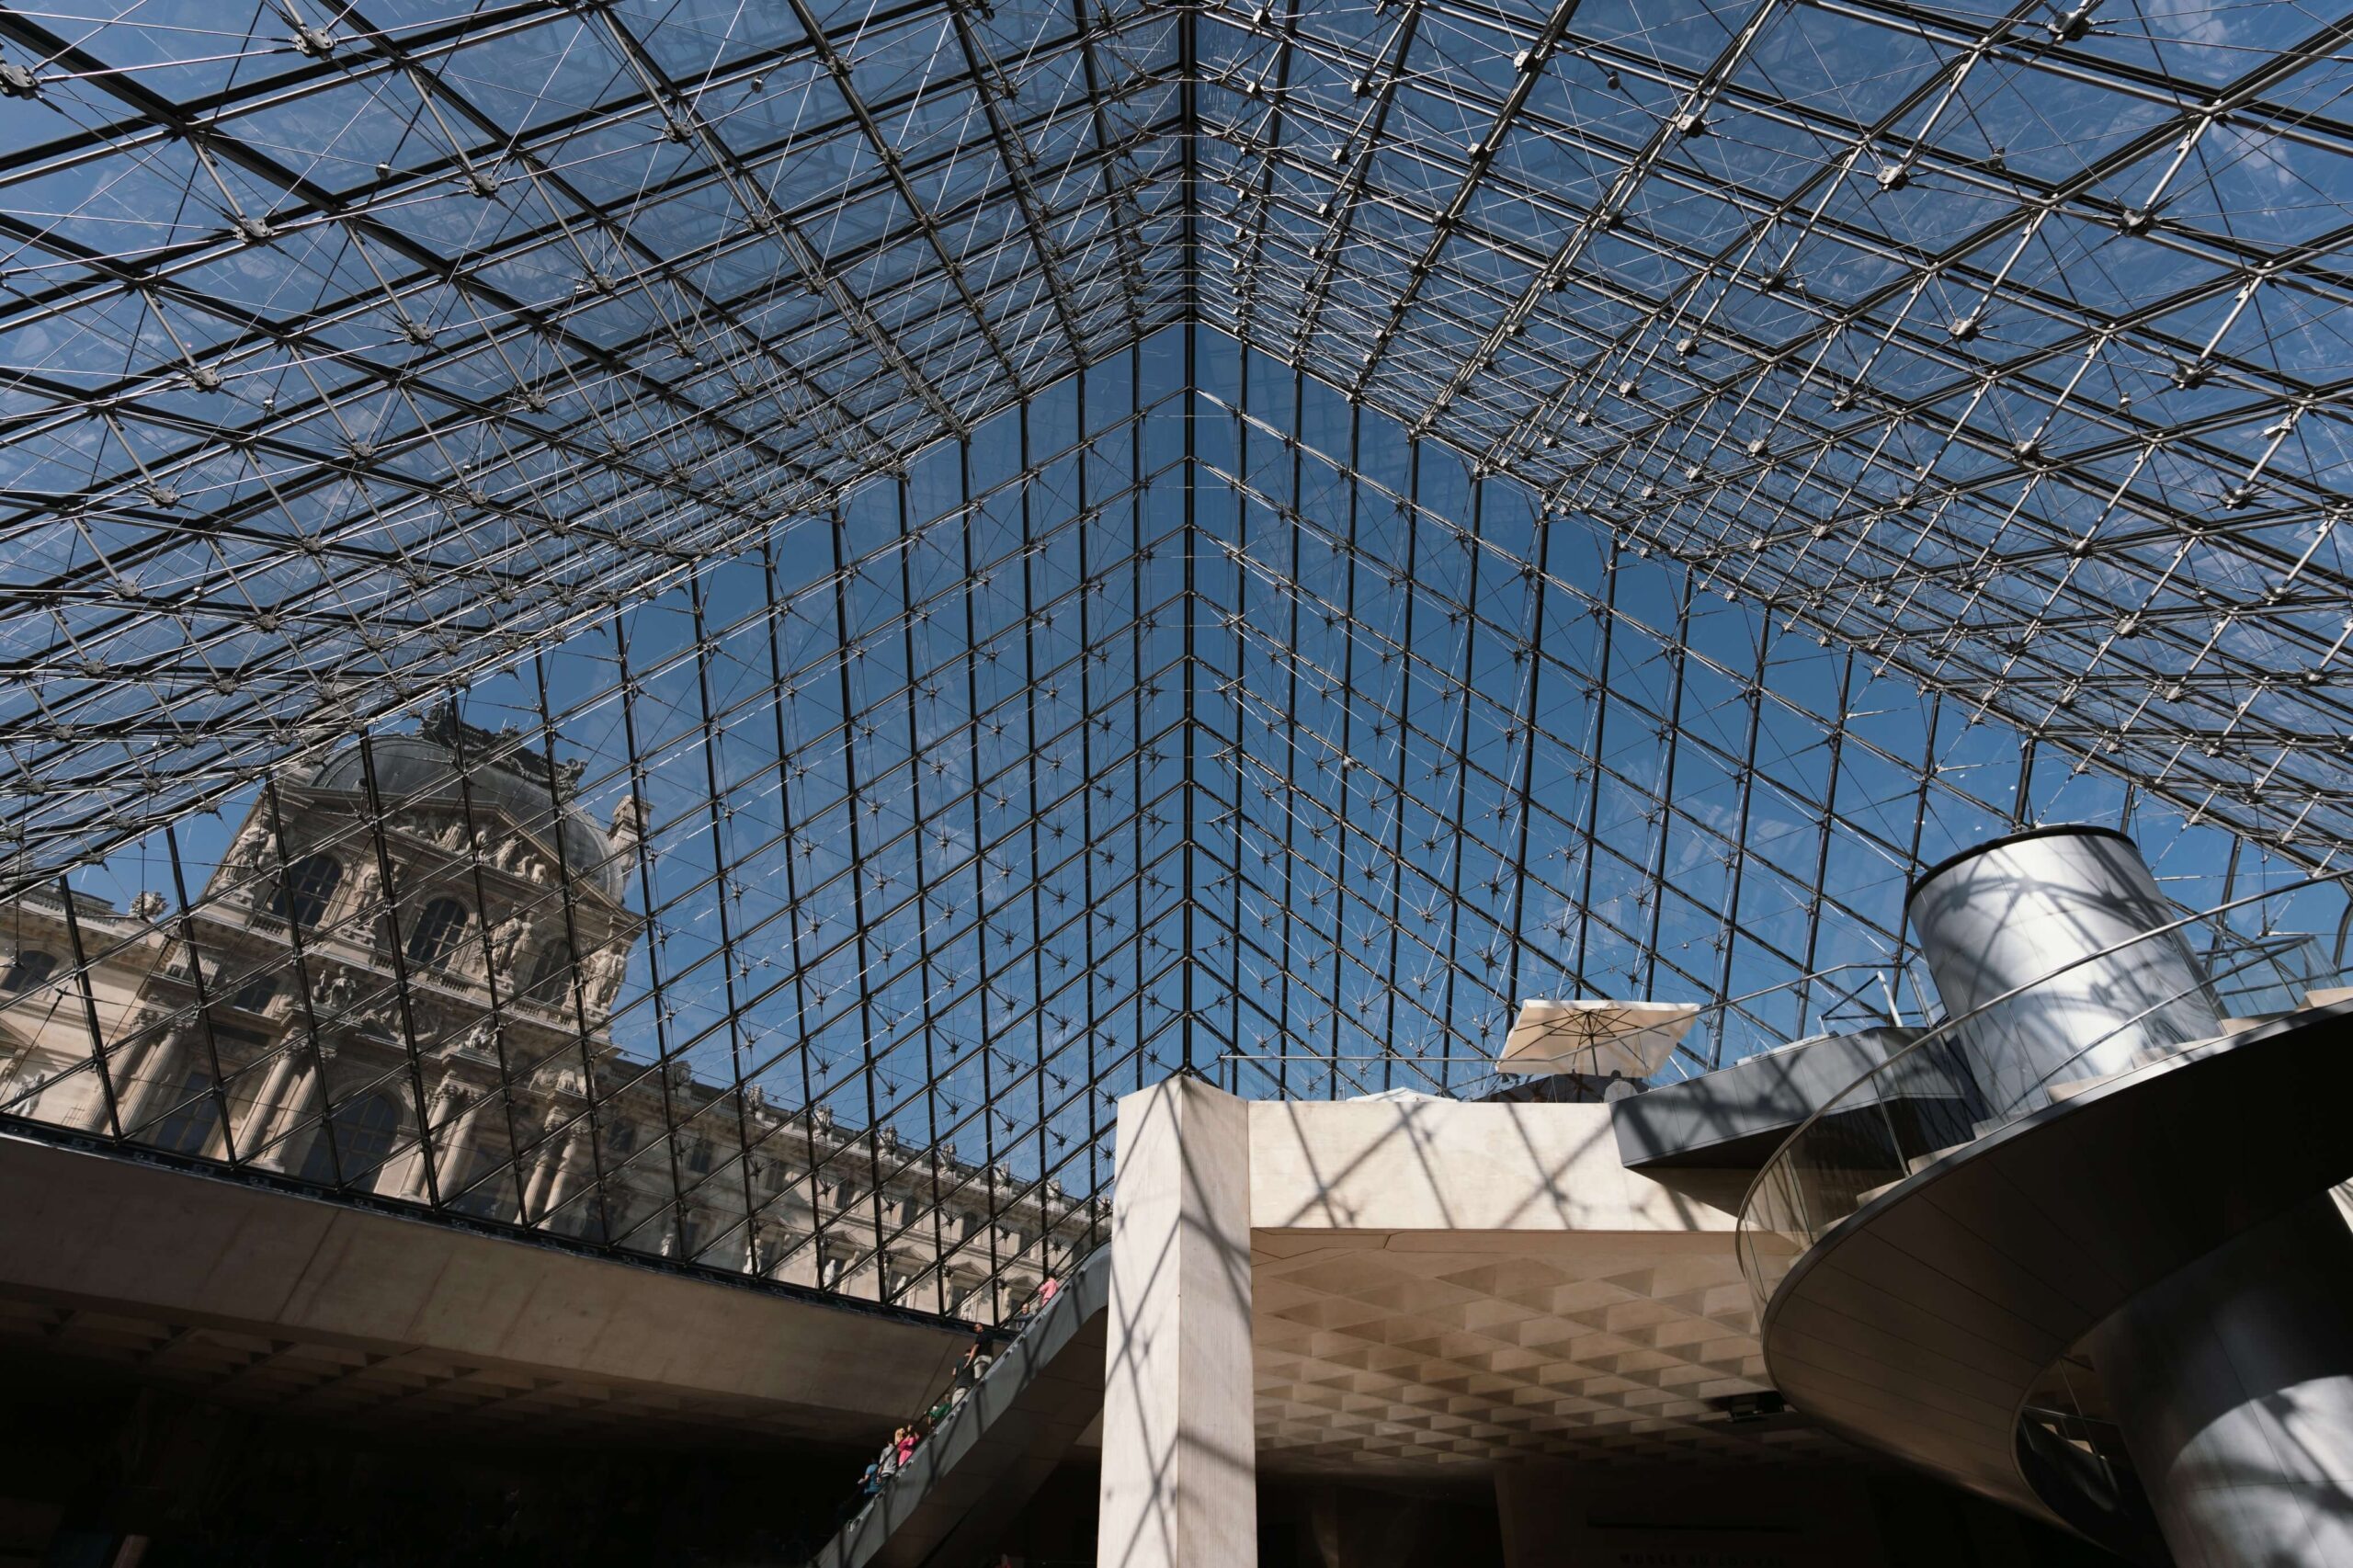 A panoramic phot of the underside of Louvre's glass pyramidal dome. A blue sky is visible through the glass.